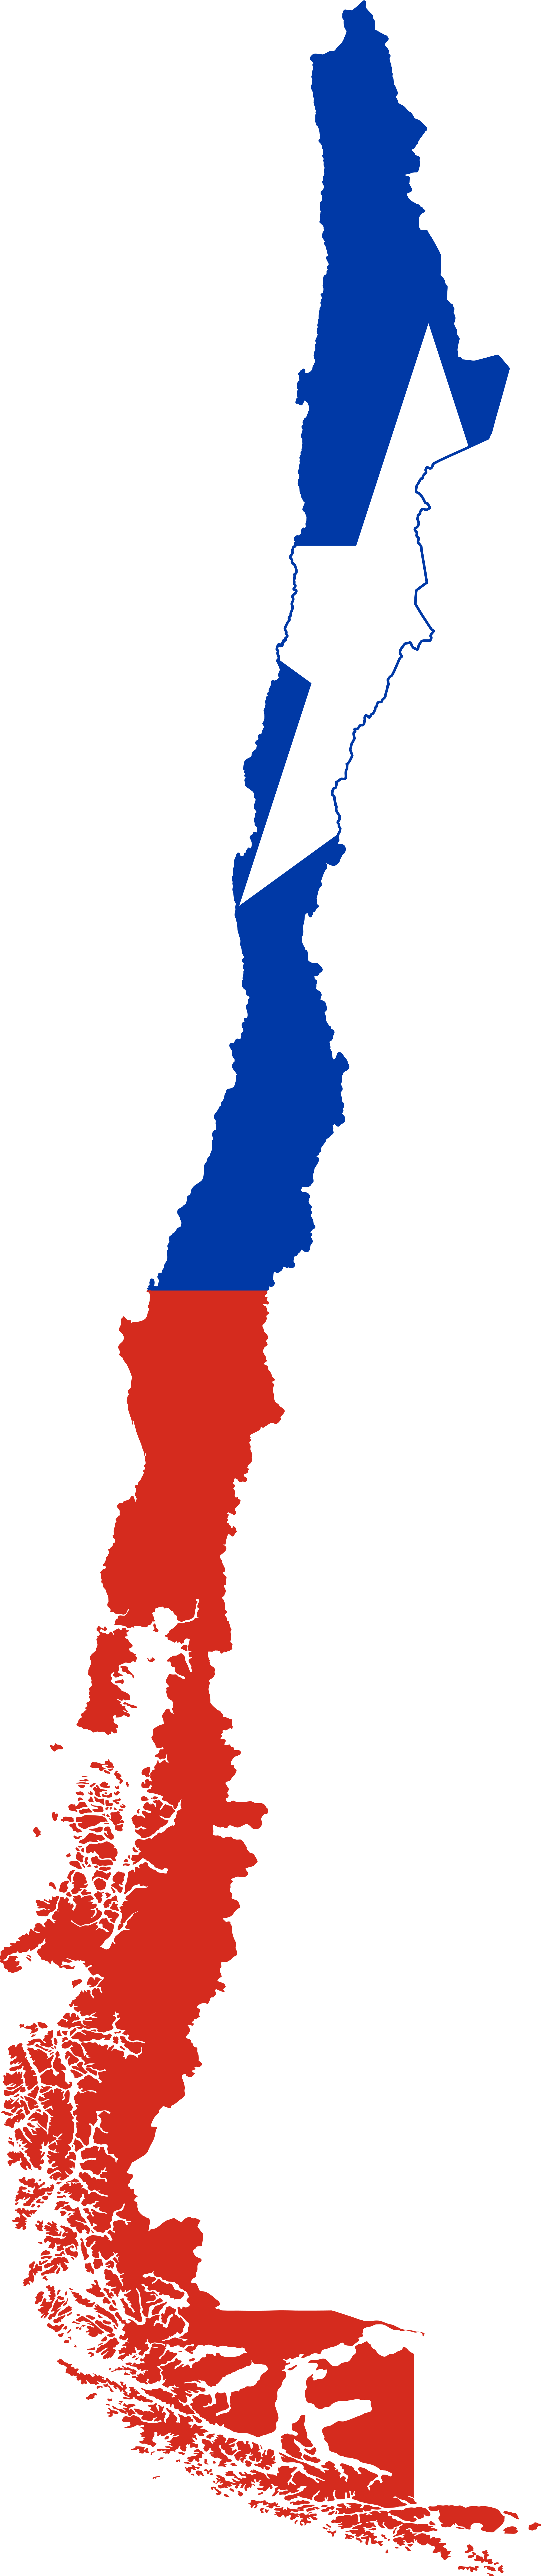 File:Chile flg-map.png